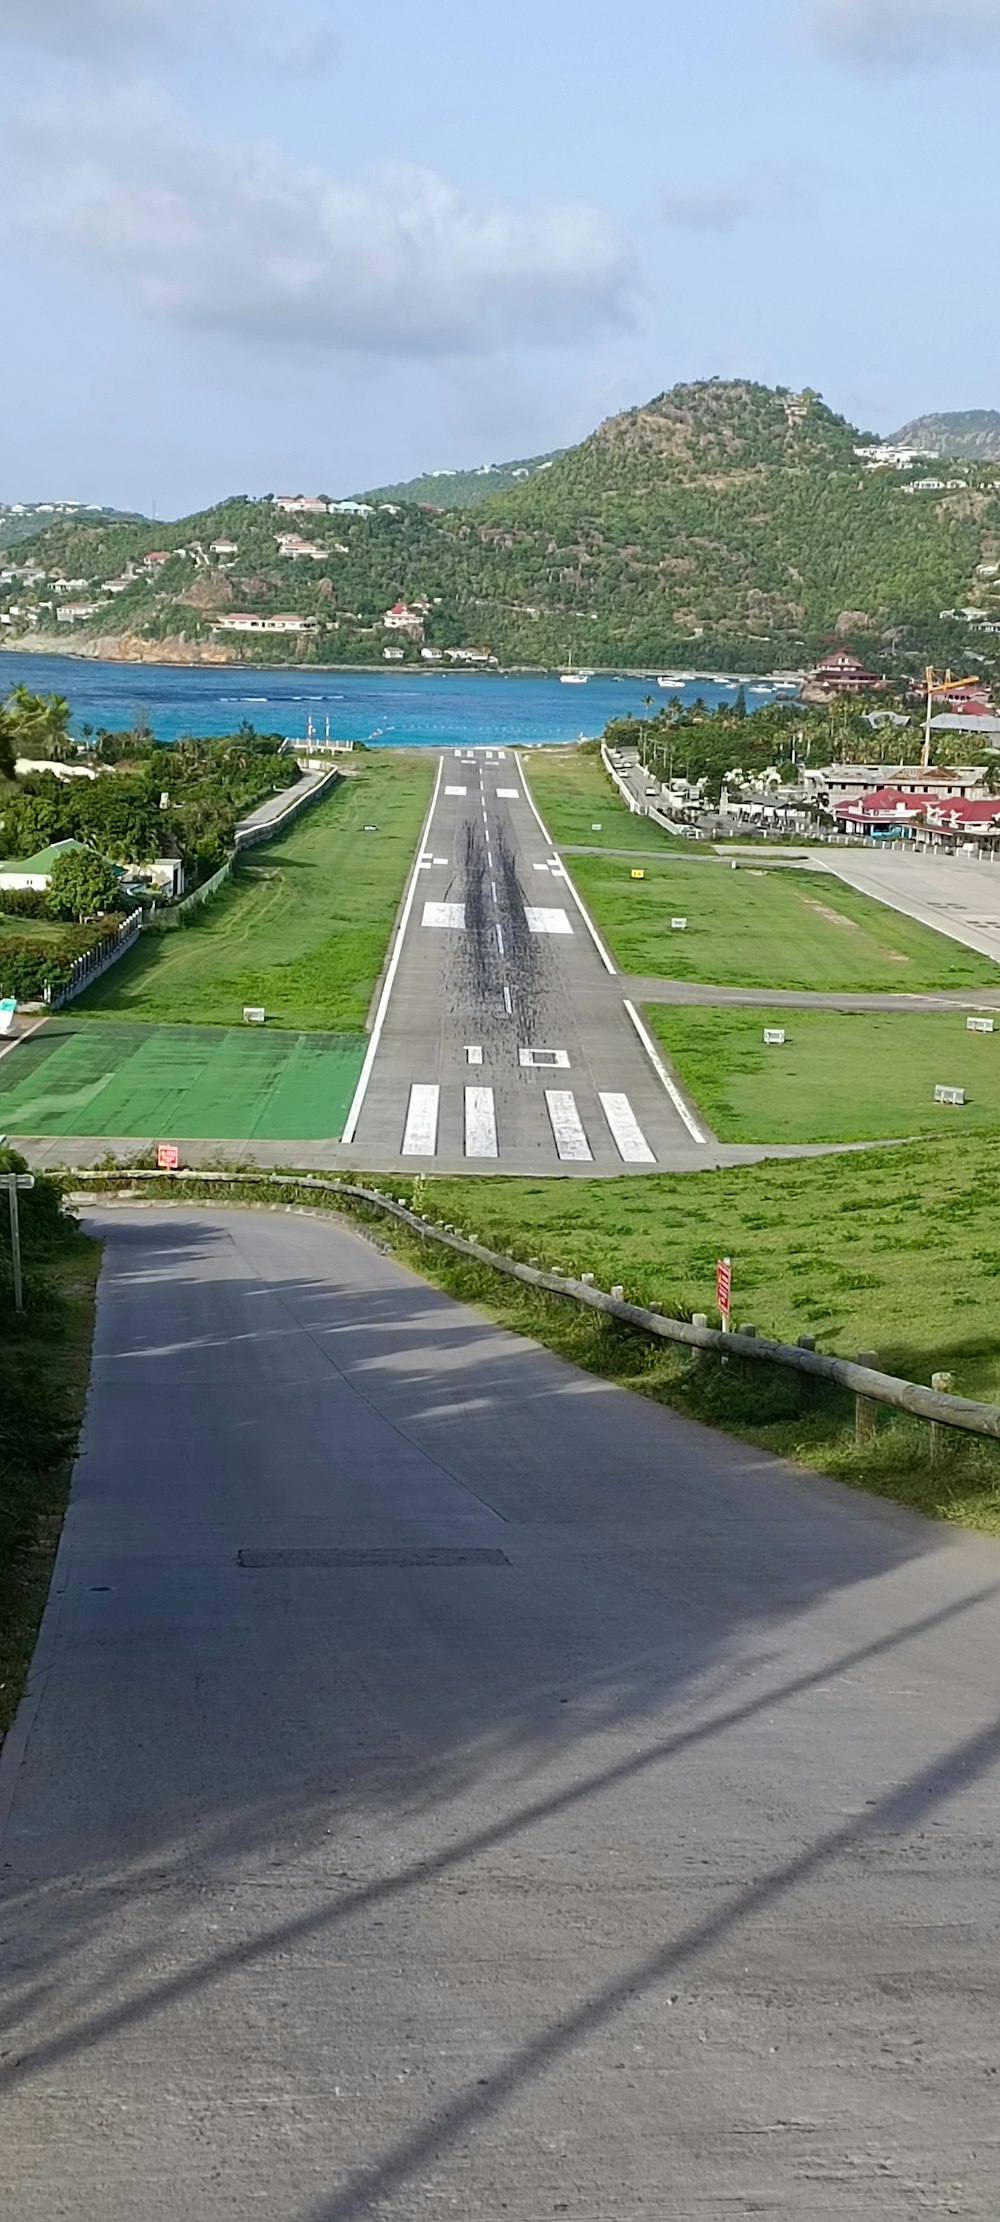 an airport runway with a plane on the runway